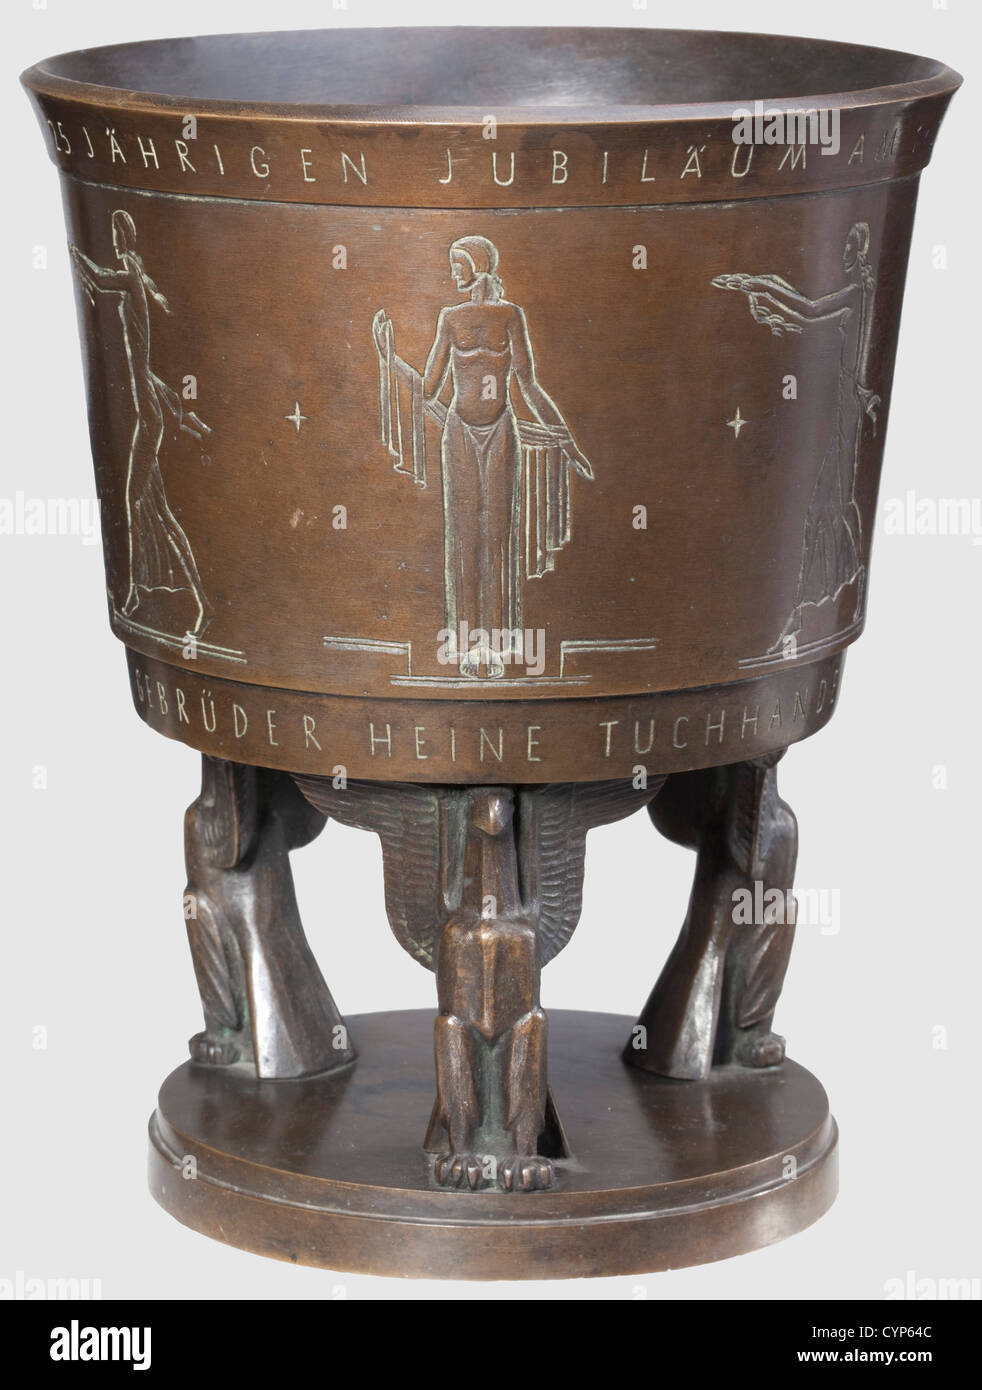 Bruno Eyermann(1888 - 1961)- a presentation bronze 1938,The bell shaped body decorated with antique mythological figures,signed "Eyermann" and dedication inscription(transl.)"For Wilhelm Schlösser celebrating 25 years with Gebrüder Heine Tuchhandels-AG 1.12.1938 - from his colleagues". The round base supported by eagle wings. Height 27.6 cm,weight 11.2 kg. Bruno Eyermann,sculptor,engraver and painter,studied at the Leipzig Academy,thereafter ibid. teacher in the department of engraving and chiselling,created amongst others the WW1 memorial in Altenb,Additional-Rights-Clearences-Not Available Stock Photo